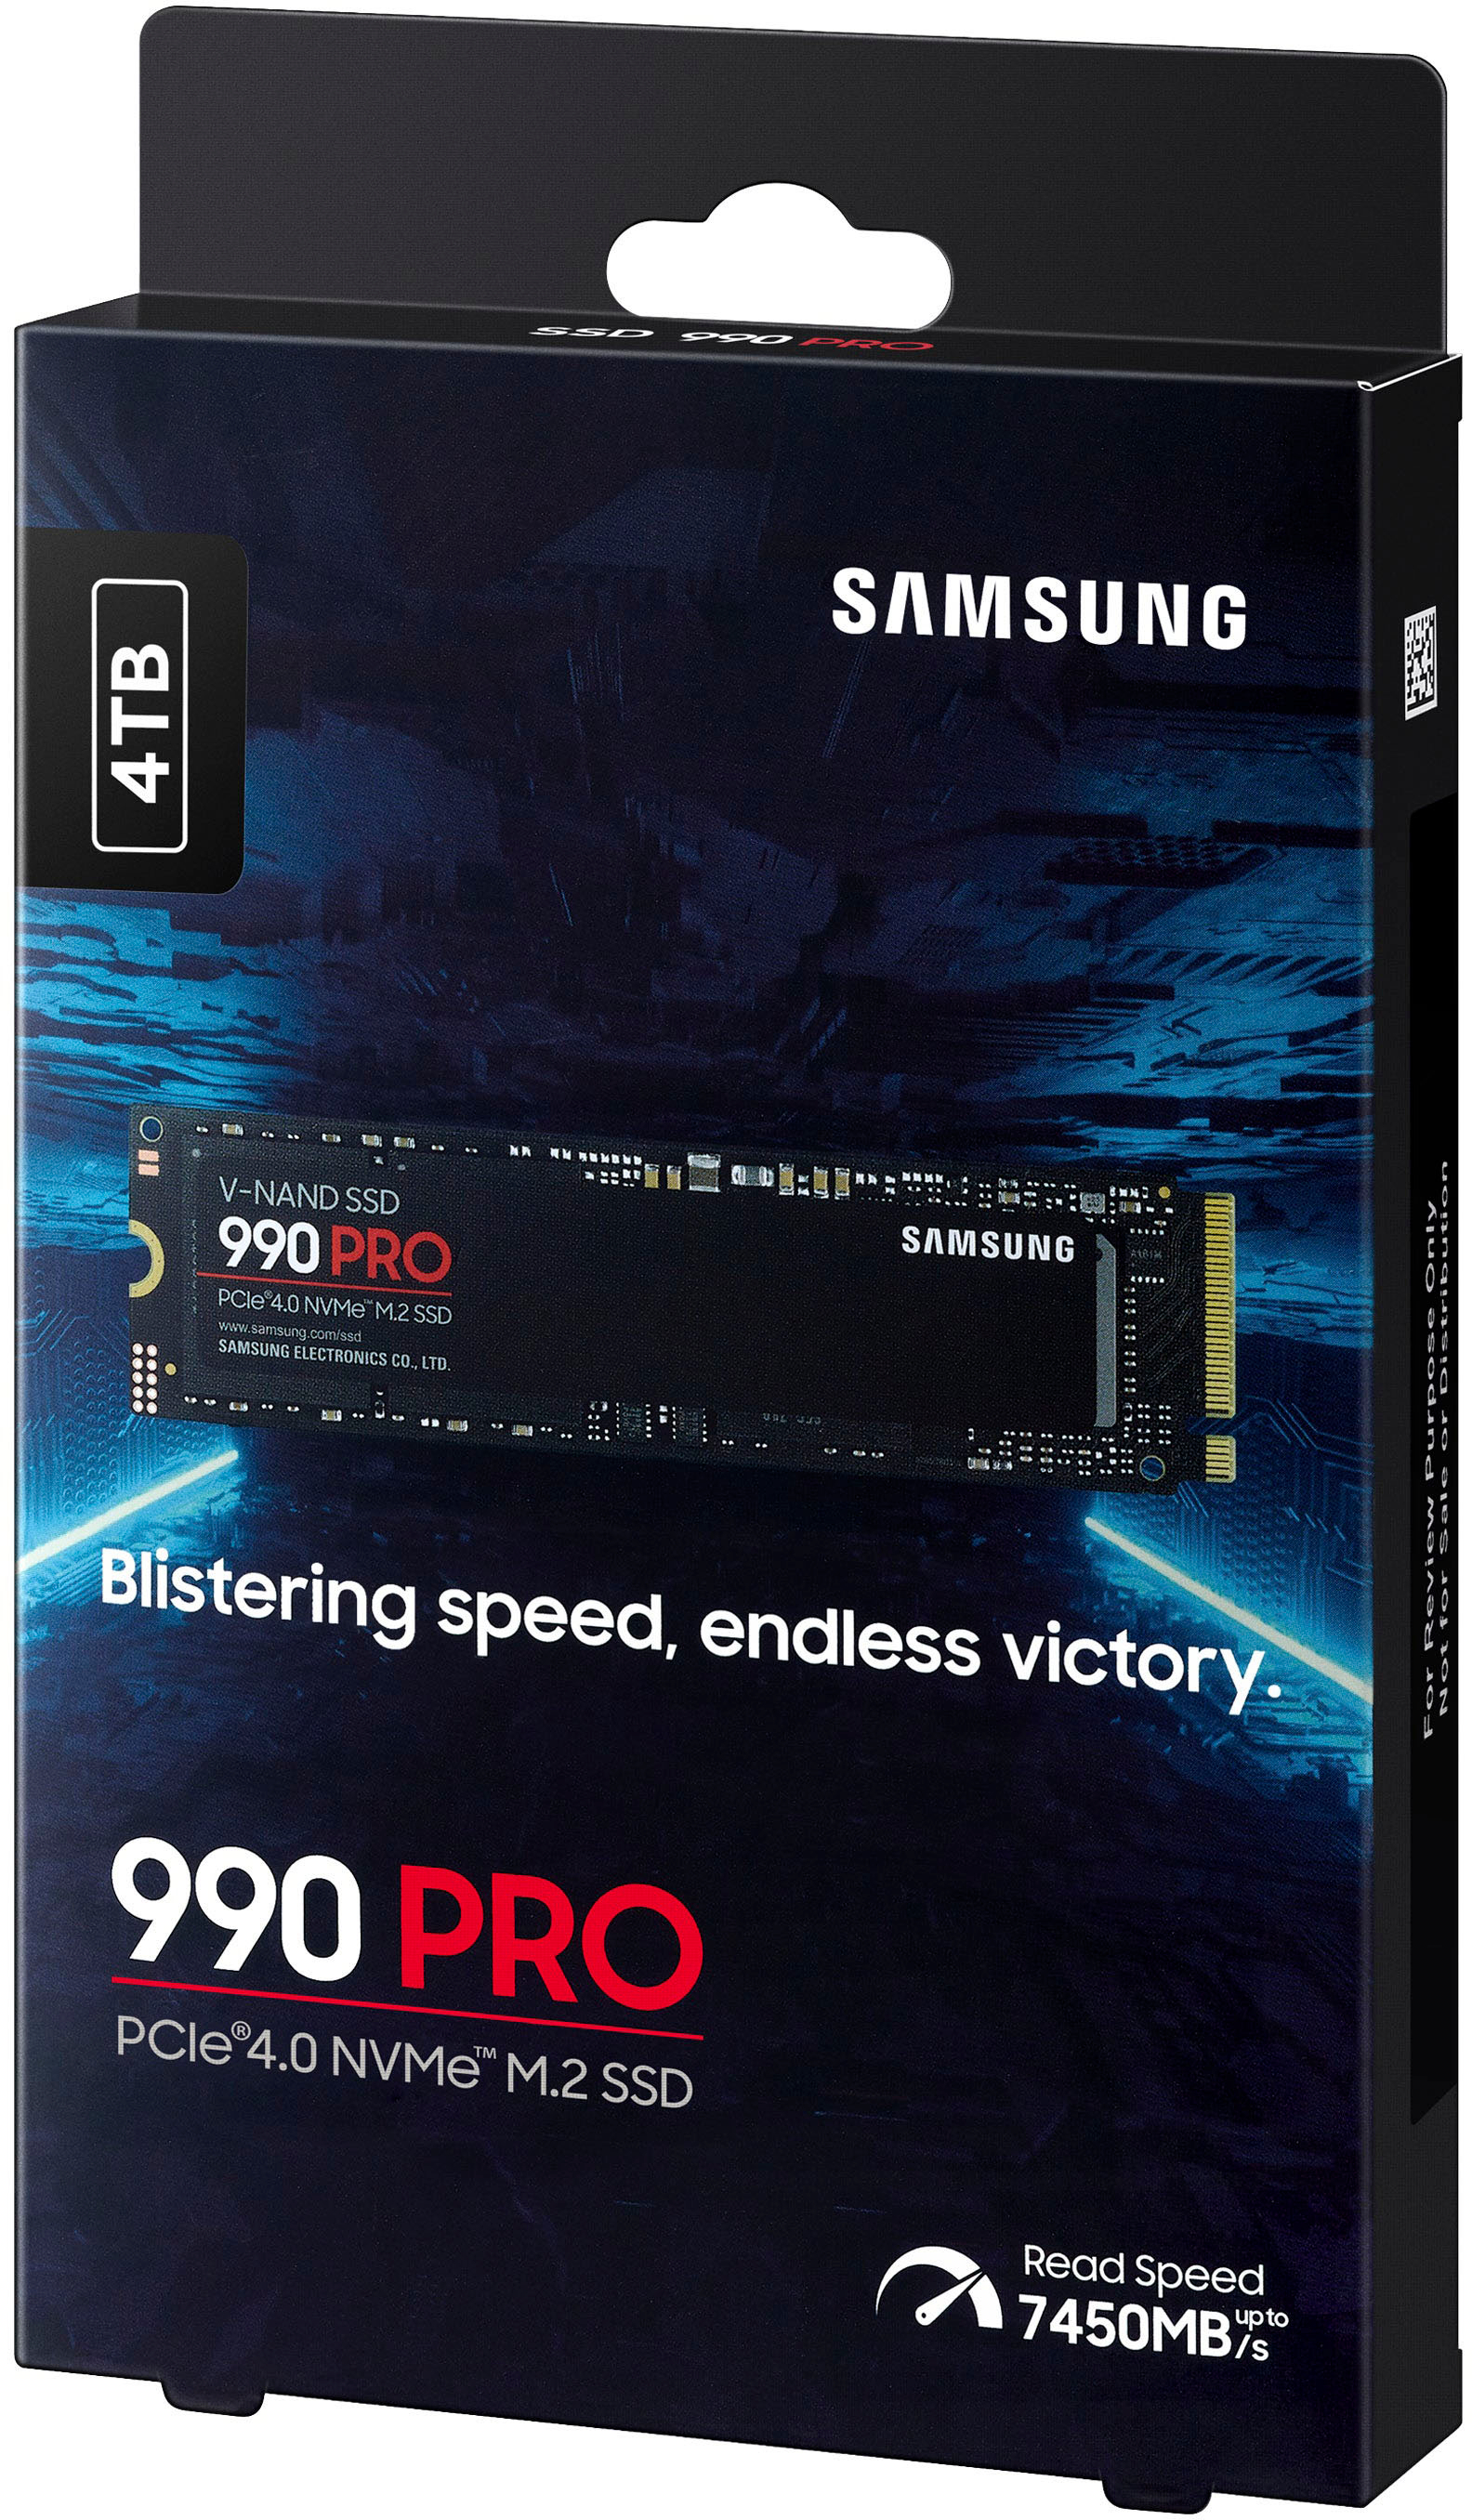 Samsung 990 Pro 4TB SSD Arrives Next Month for $345